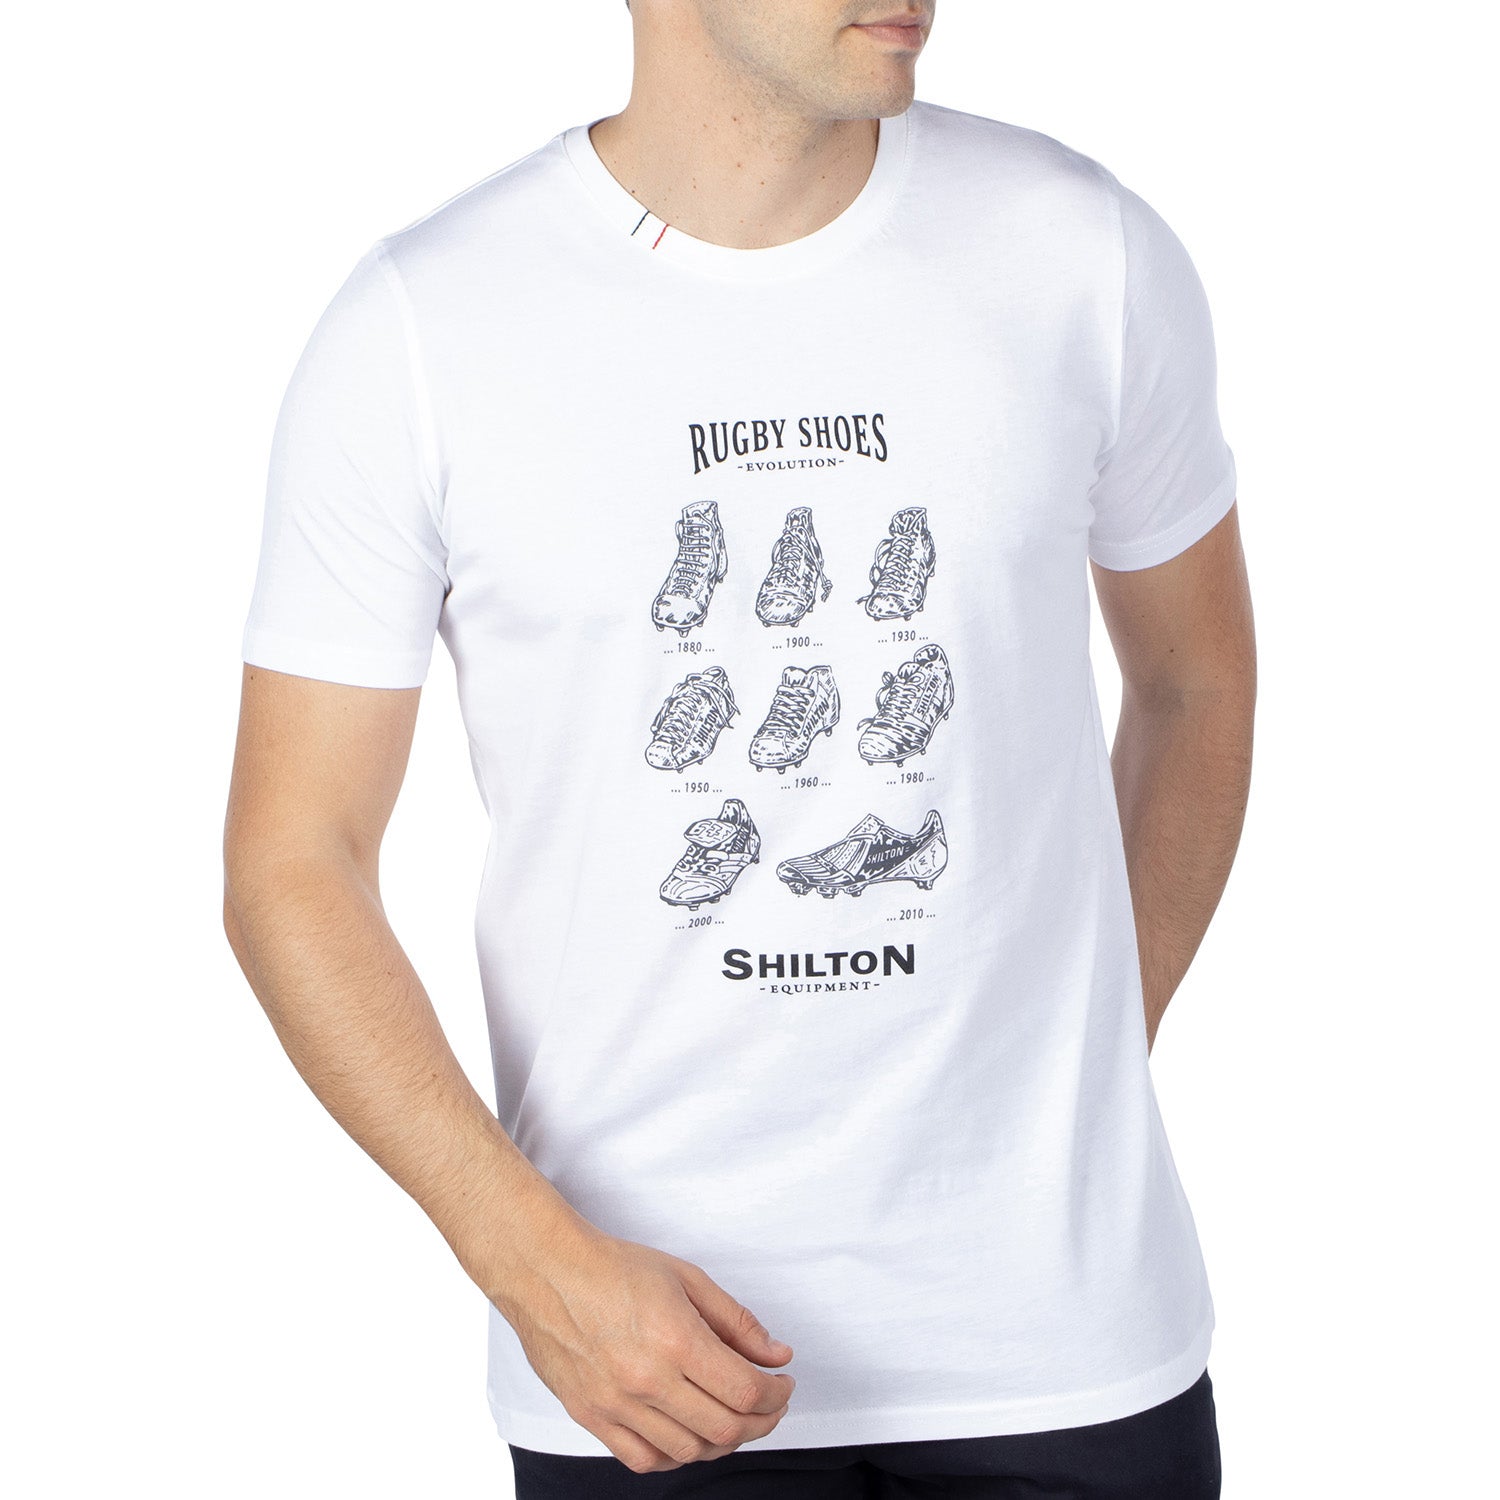 T-shirt rugby shoes evolution